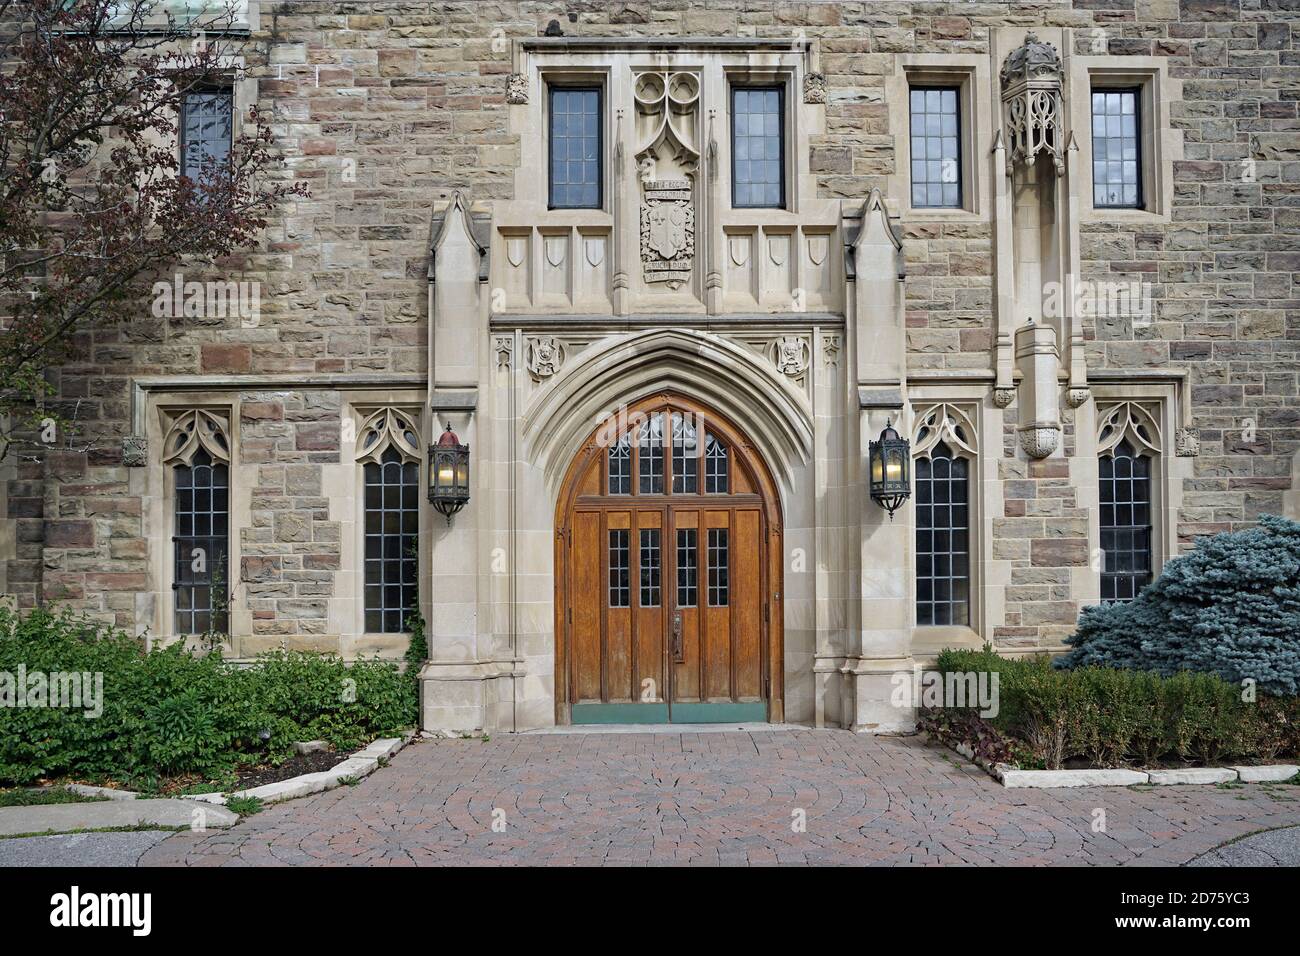 Toronto, Canada - October 20, 2020:  Loretto Abbey is an all-girls Catholic secondary school founded in 1847, showing the main entrance to its gothic Stock Photo